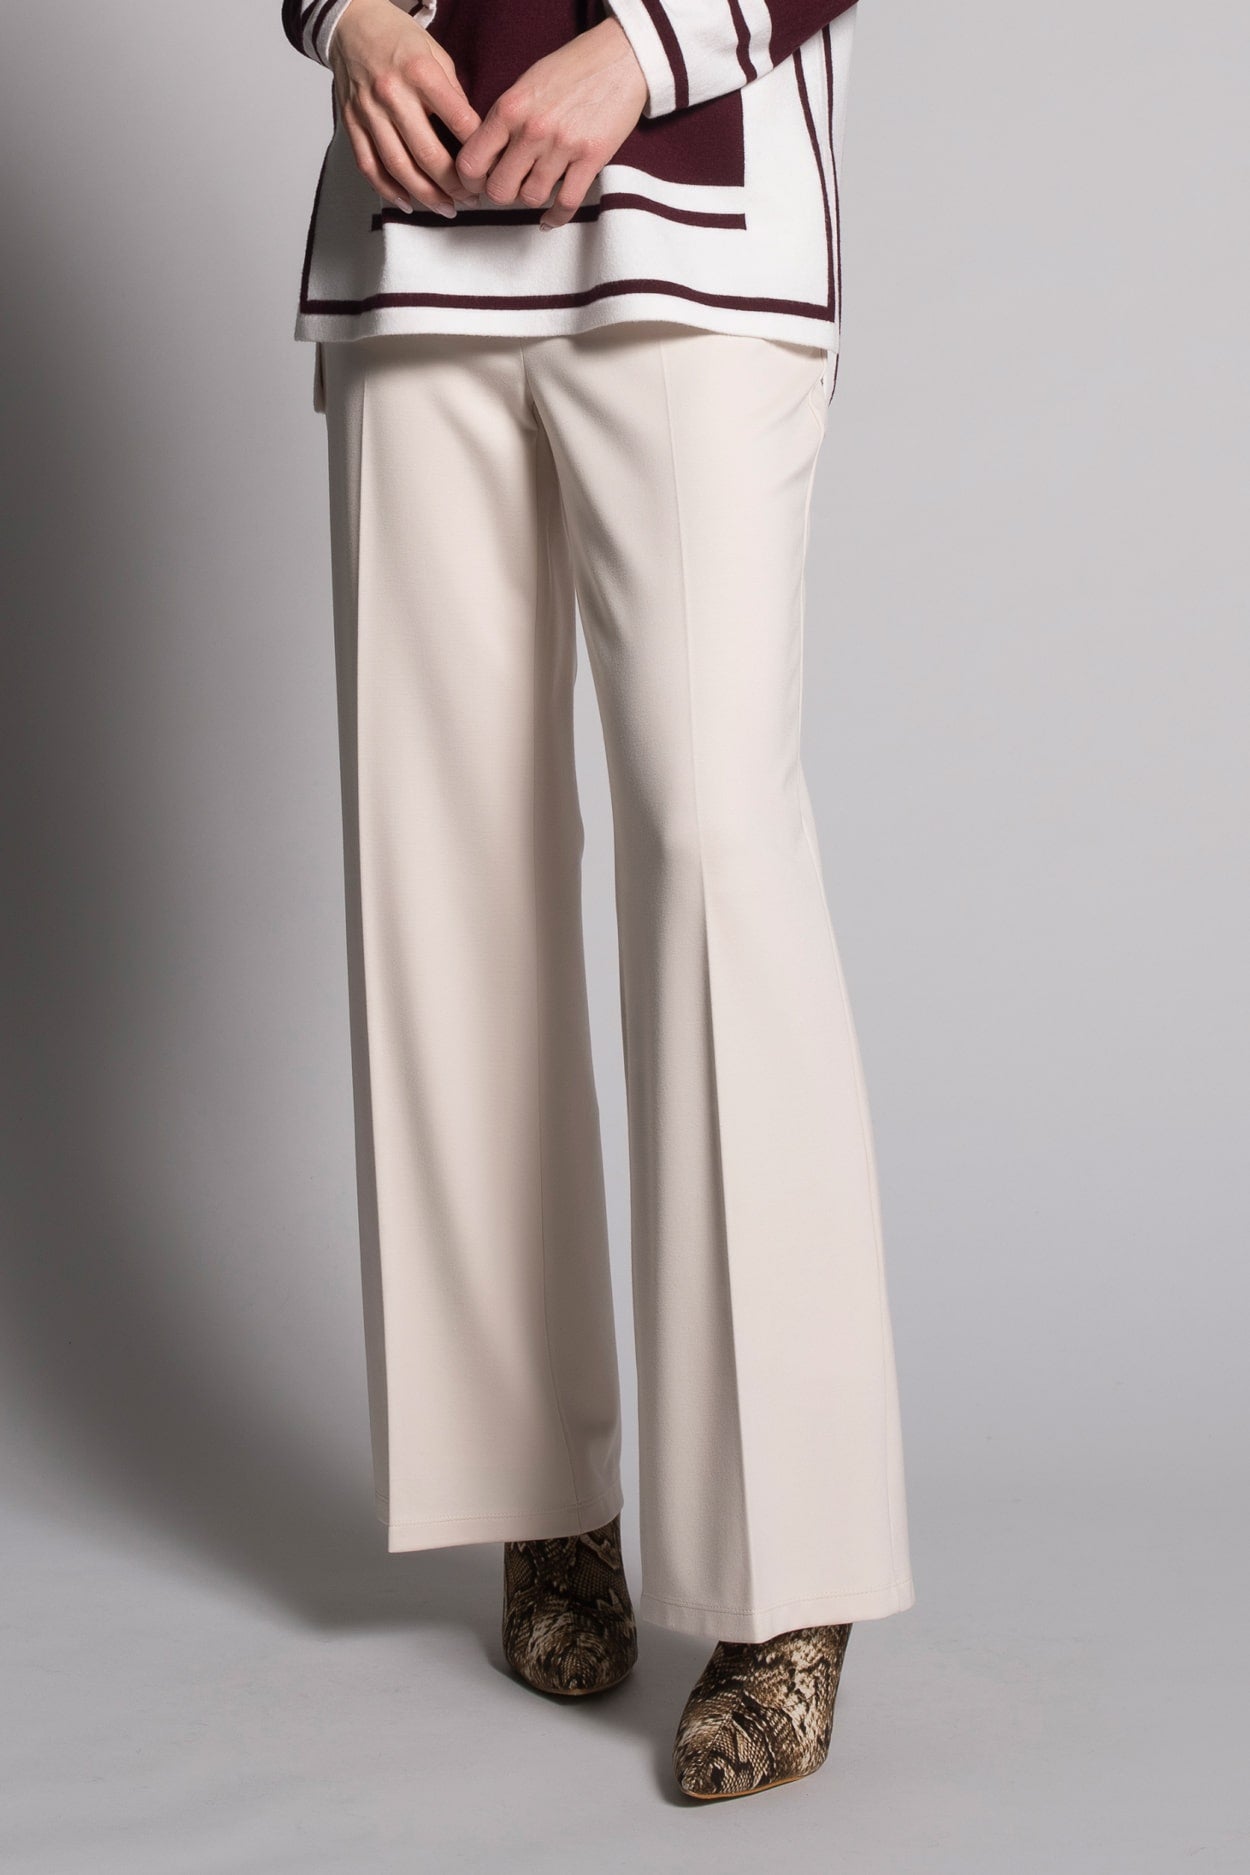 Wide Leg Pants, Picadilly Canada